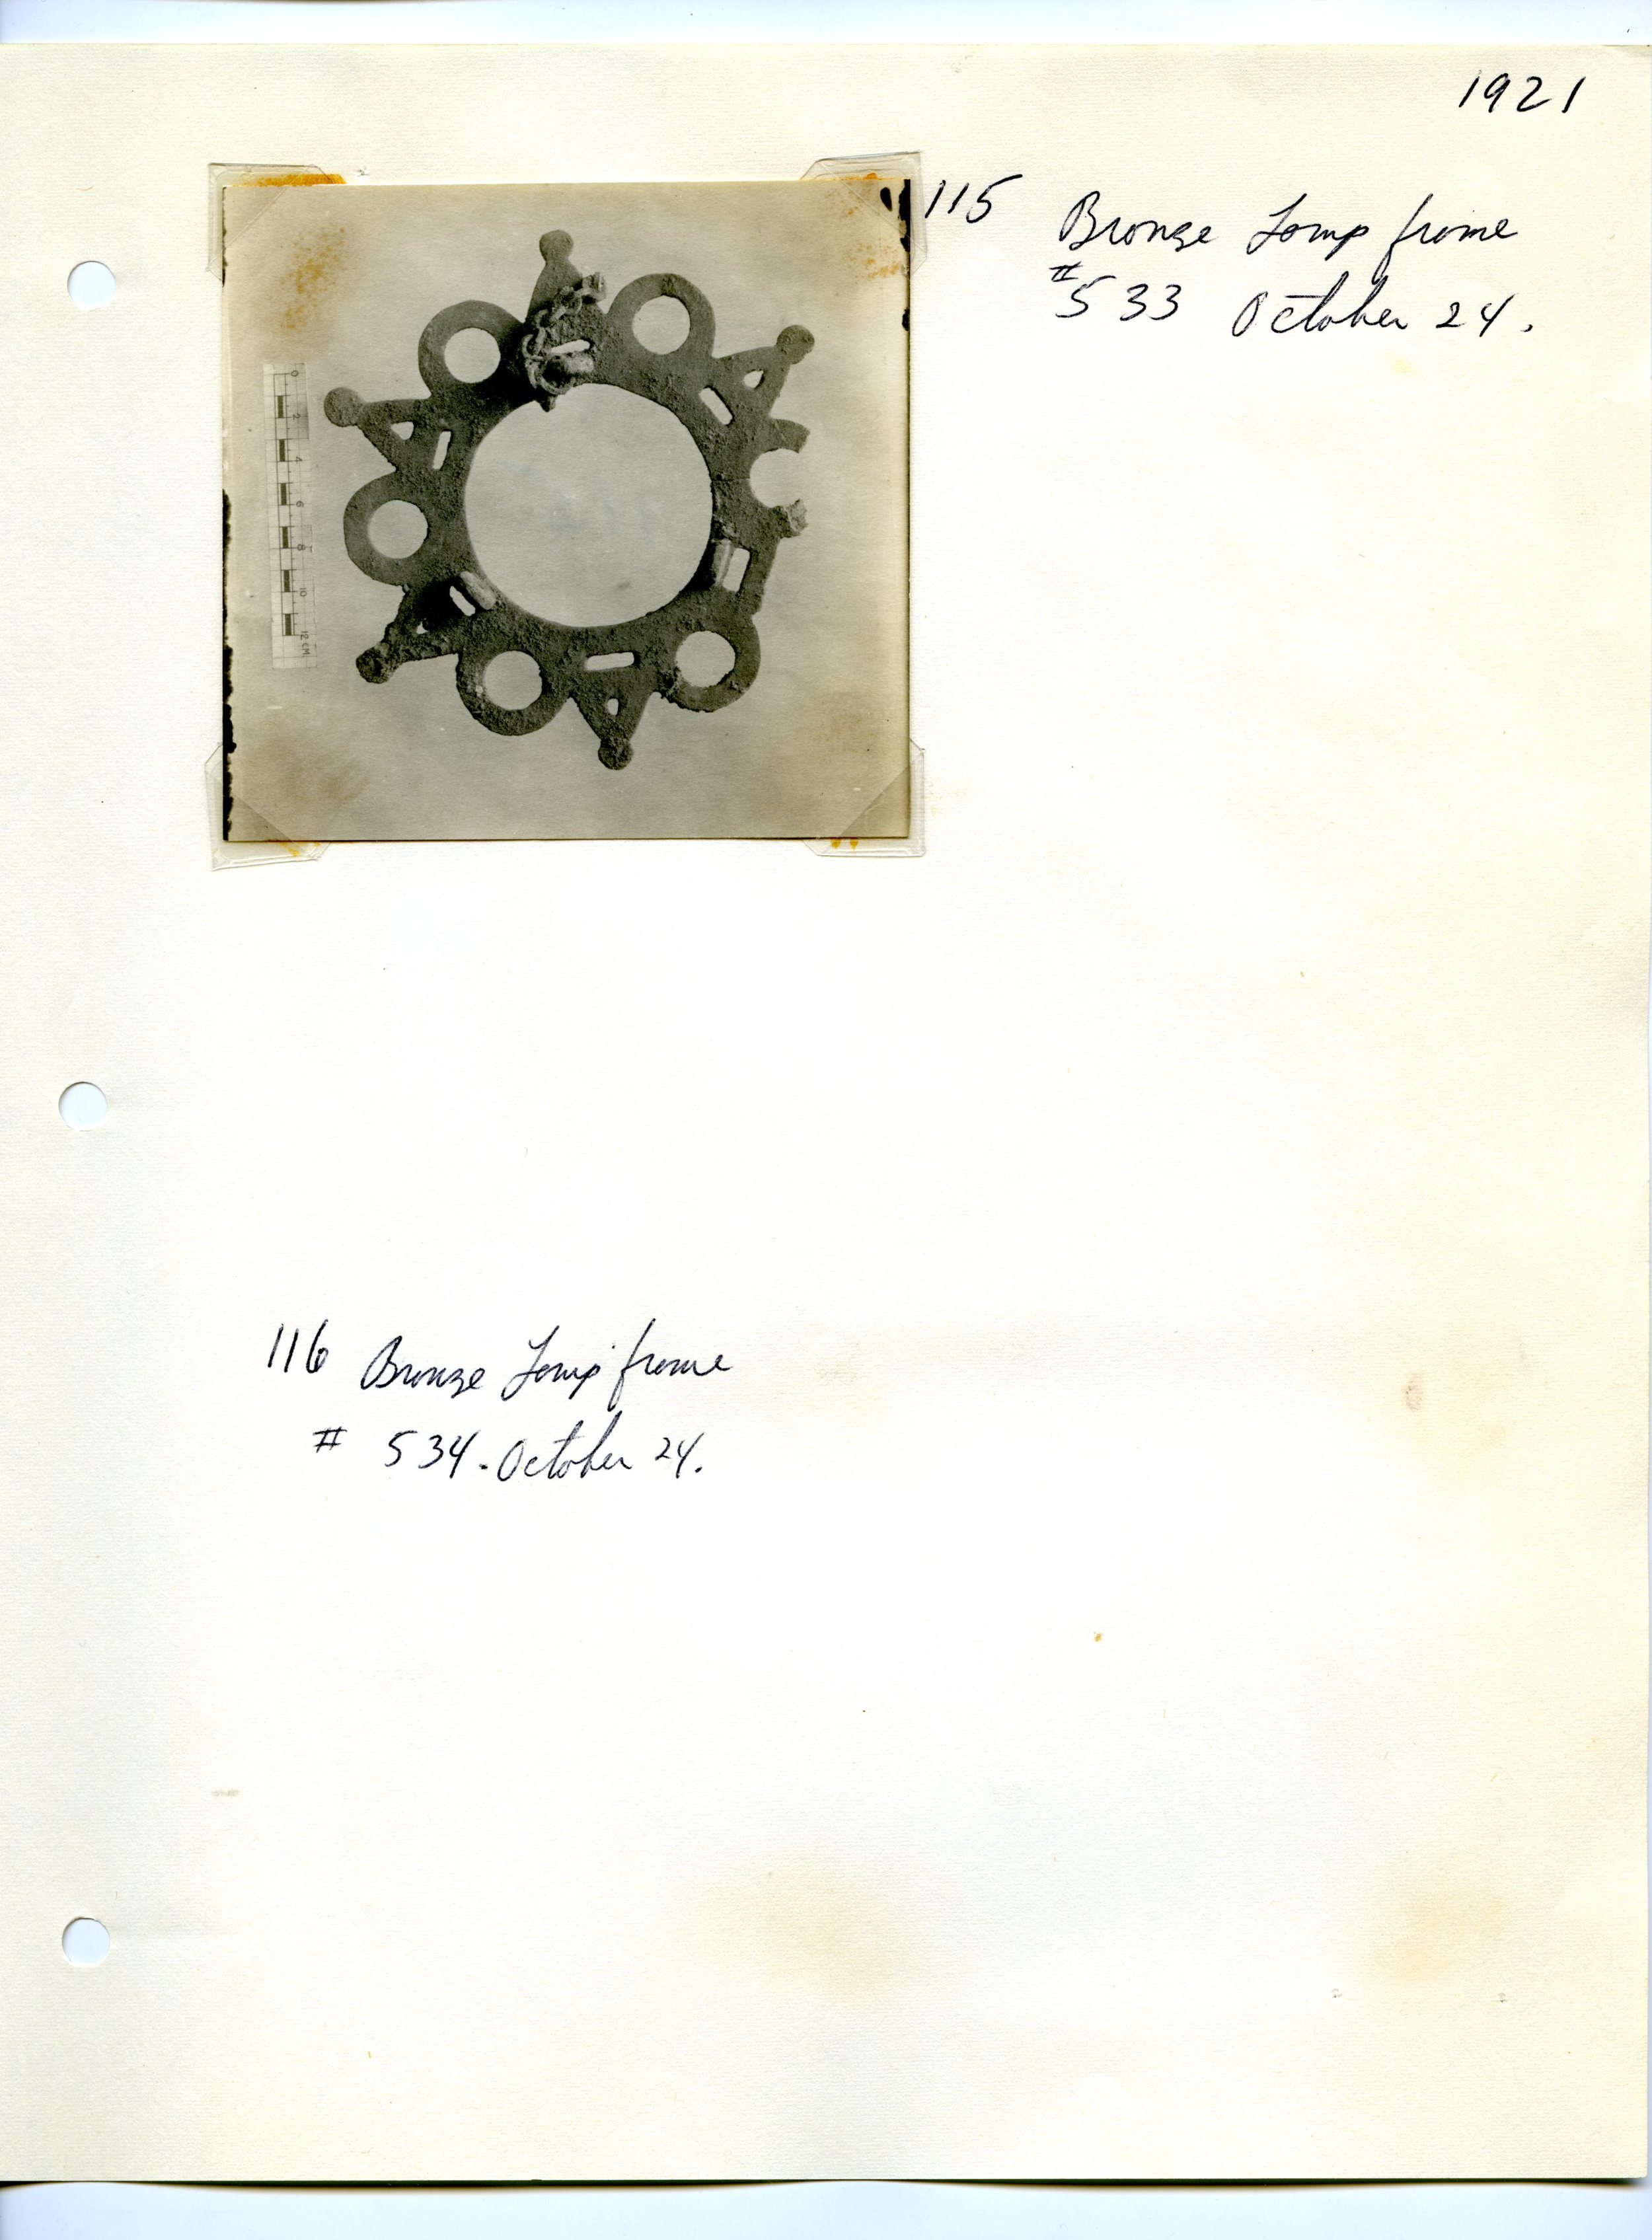 Excavation Notes and Photograph of a Polycandelon